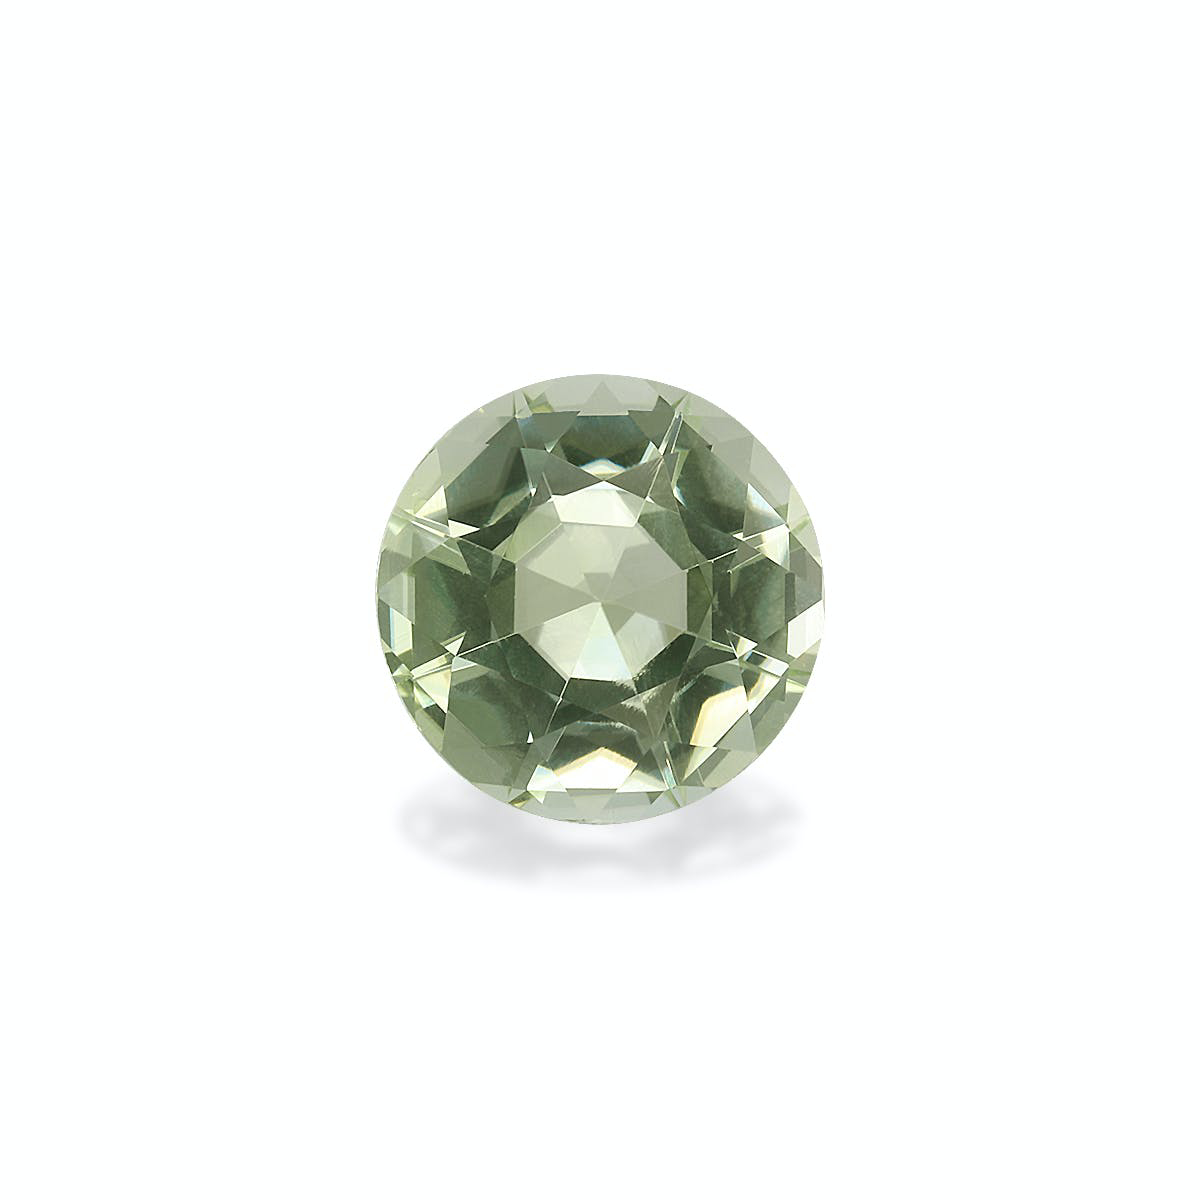 Picture of Mist Green Tourmaline 2.69ct - 9mm (TG1553)